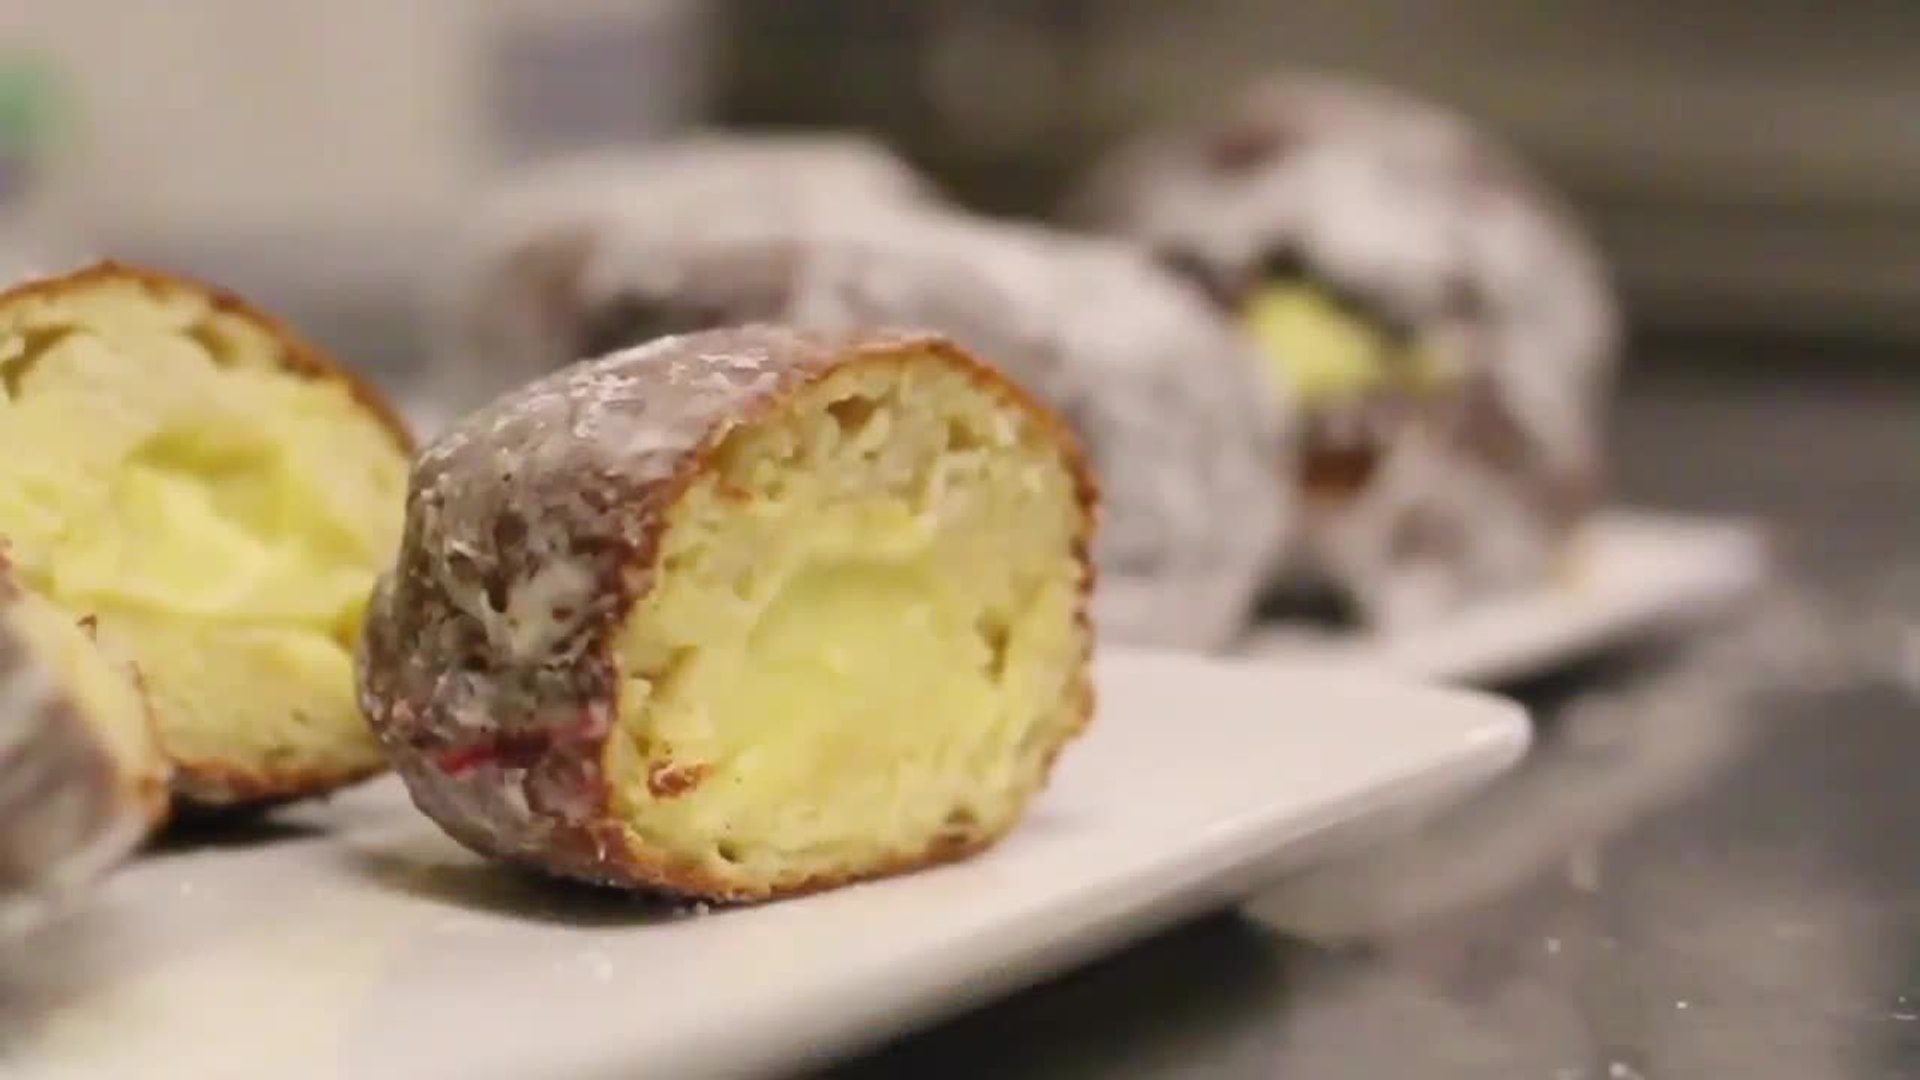 Paczki doughnut: What is it? How is it made? Where do I get one? - ABC15 Things To Do